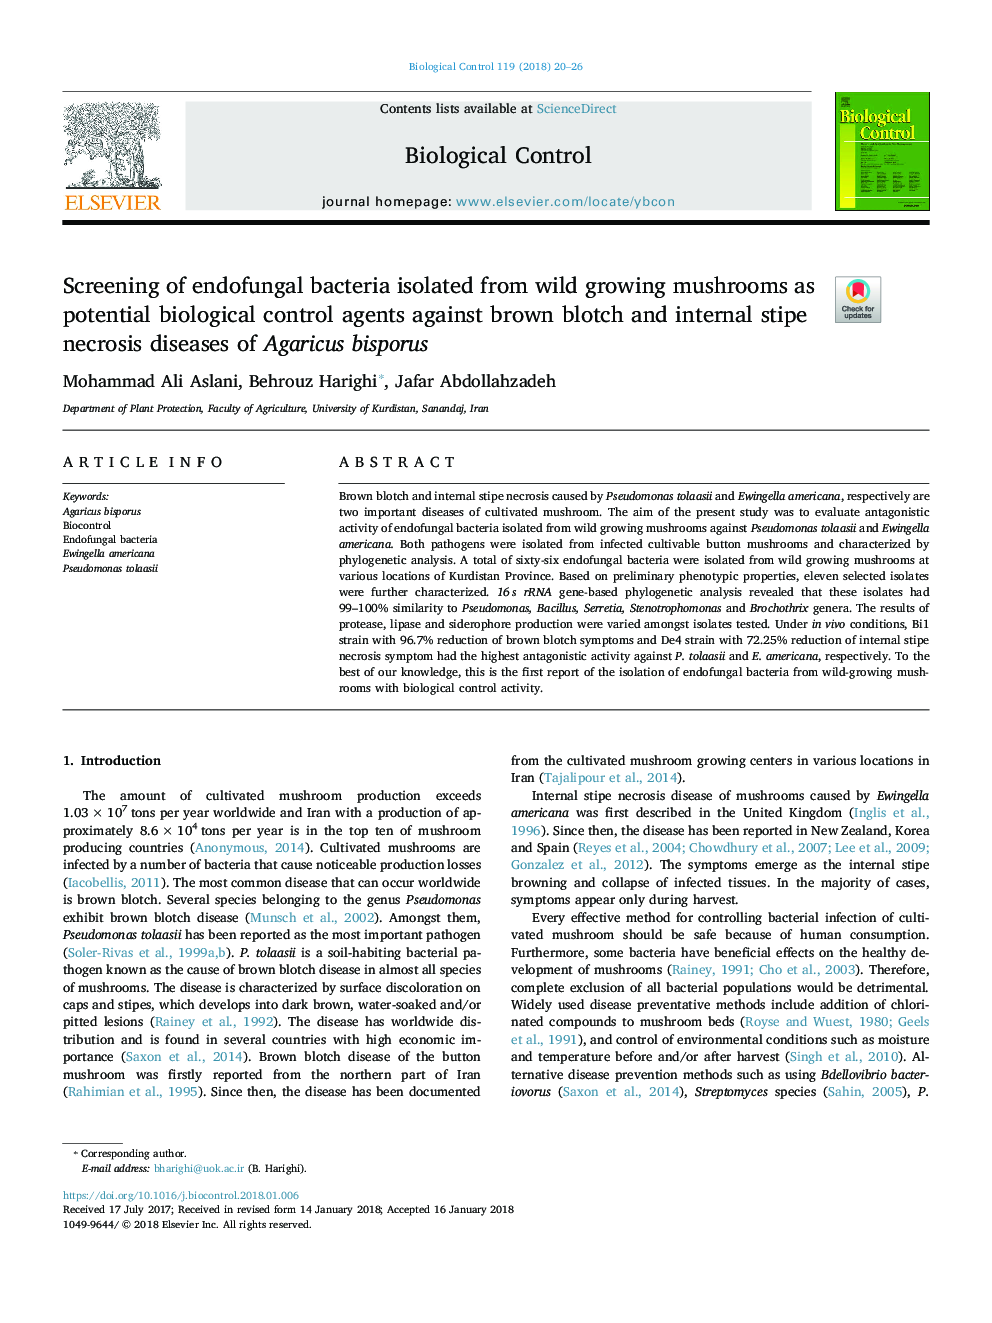 Screening of endofungal bacteria isolated from wild growing mushrooms as potential biological control agents against brown blotch and internal stipe necrosis diseases of Agaricus bisporus